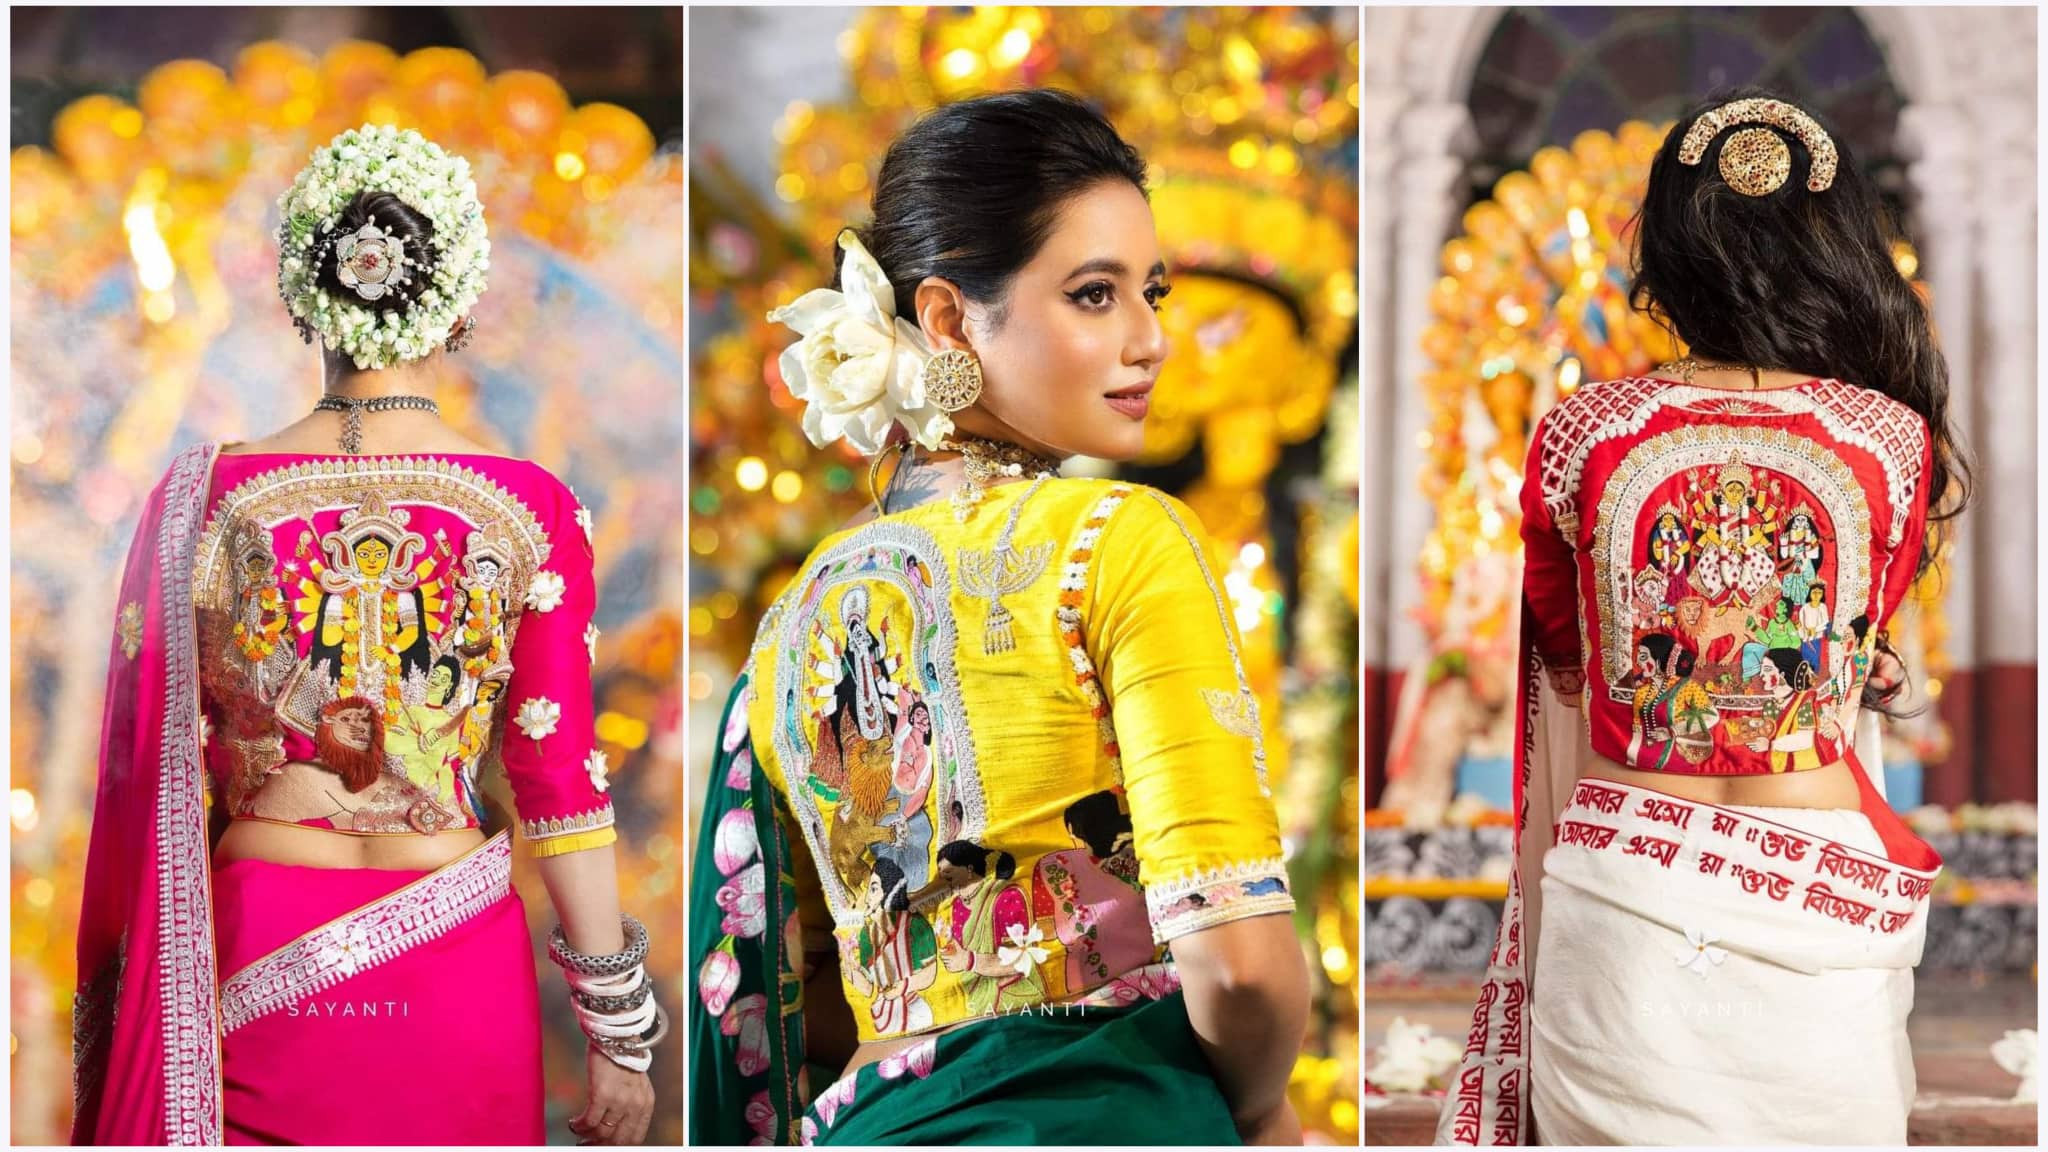 Brighten Up Your Durga Puja With These Gorgeous Blouse Designs | Blouse  designs, Unique blouse designs, Blouse designs silk